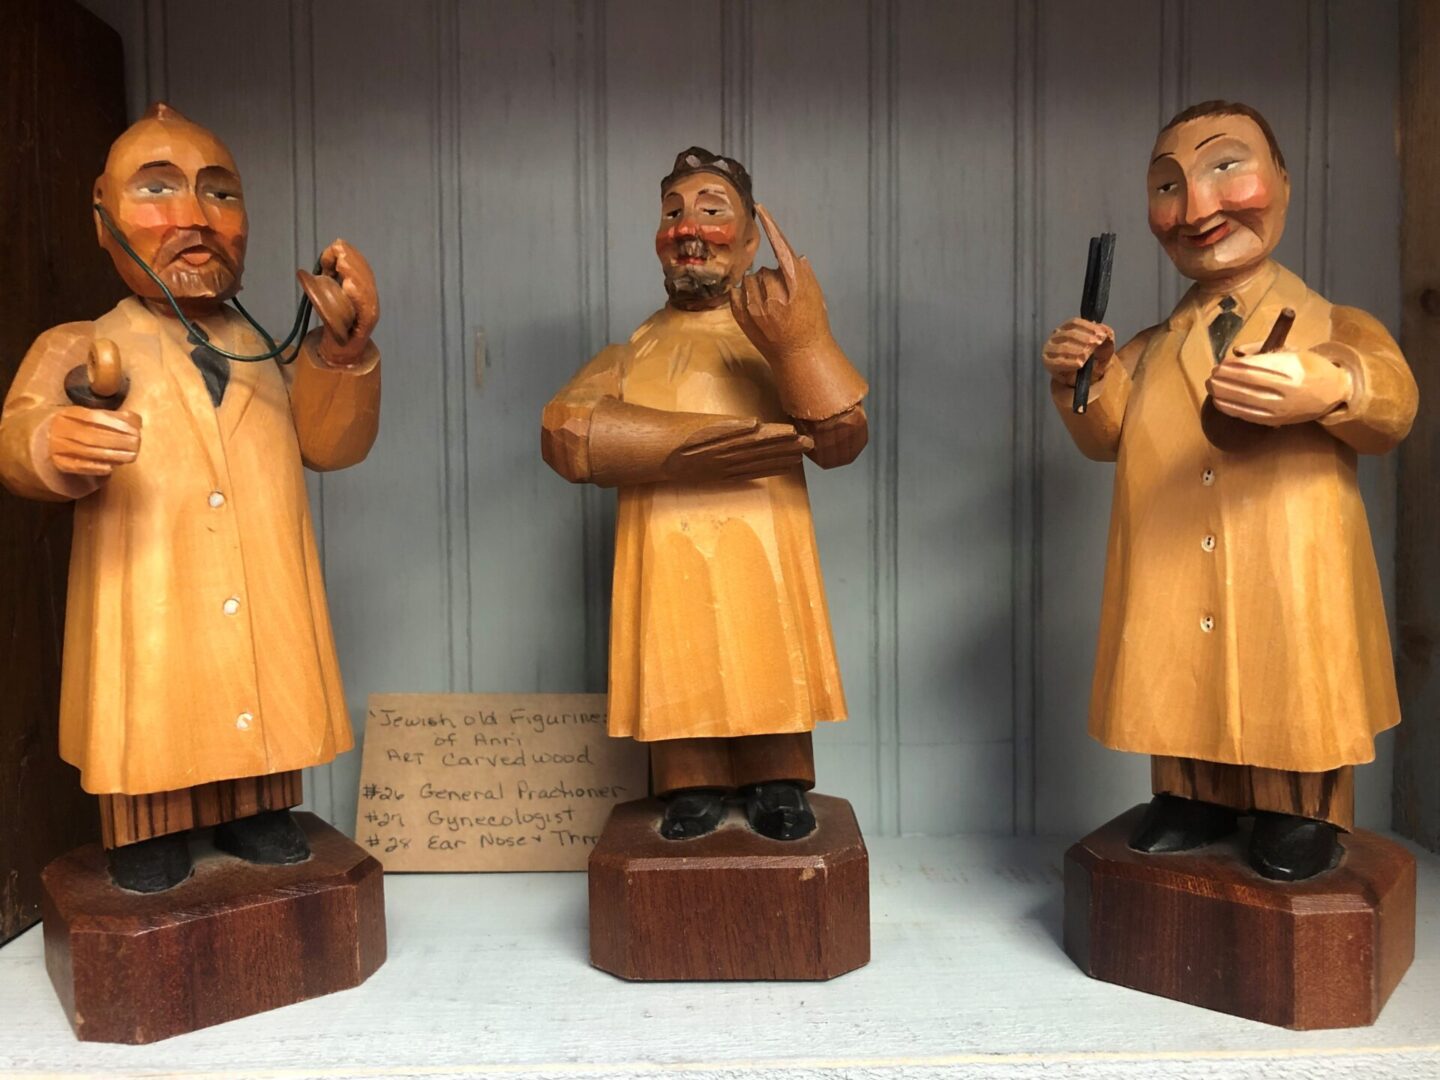 Three statues of men in yellow coats and hats.